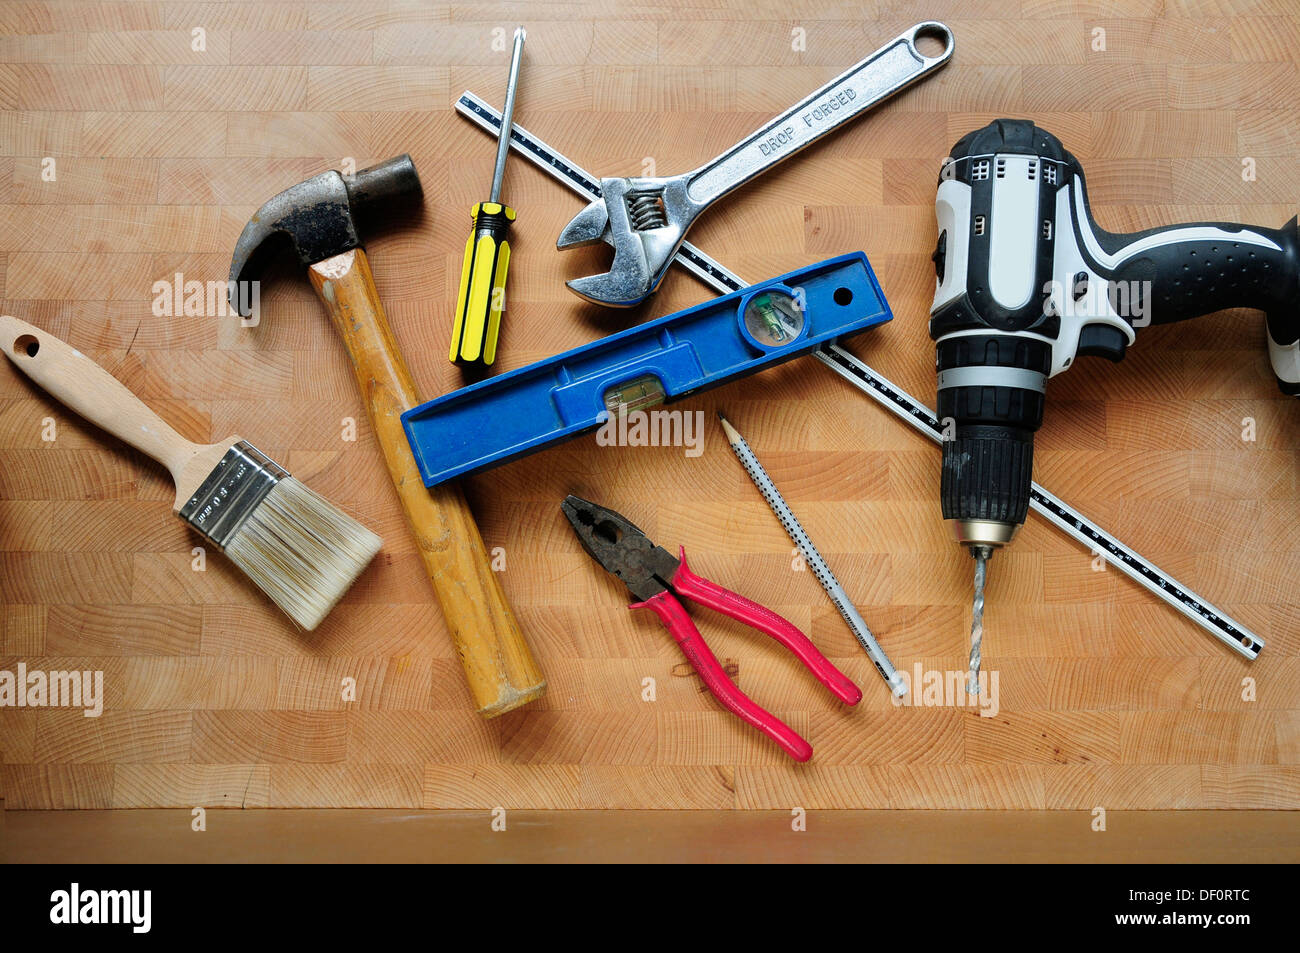 Workman and handyman DIY tools arranged on wooden table. Stock Photo